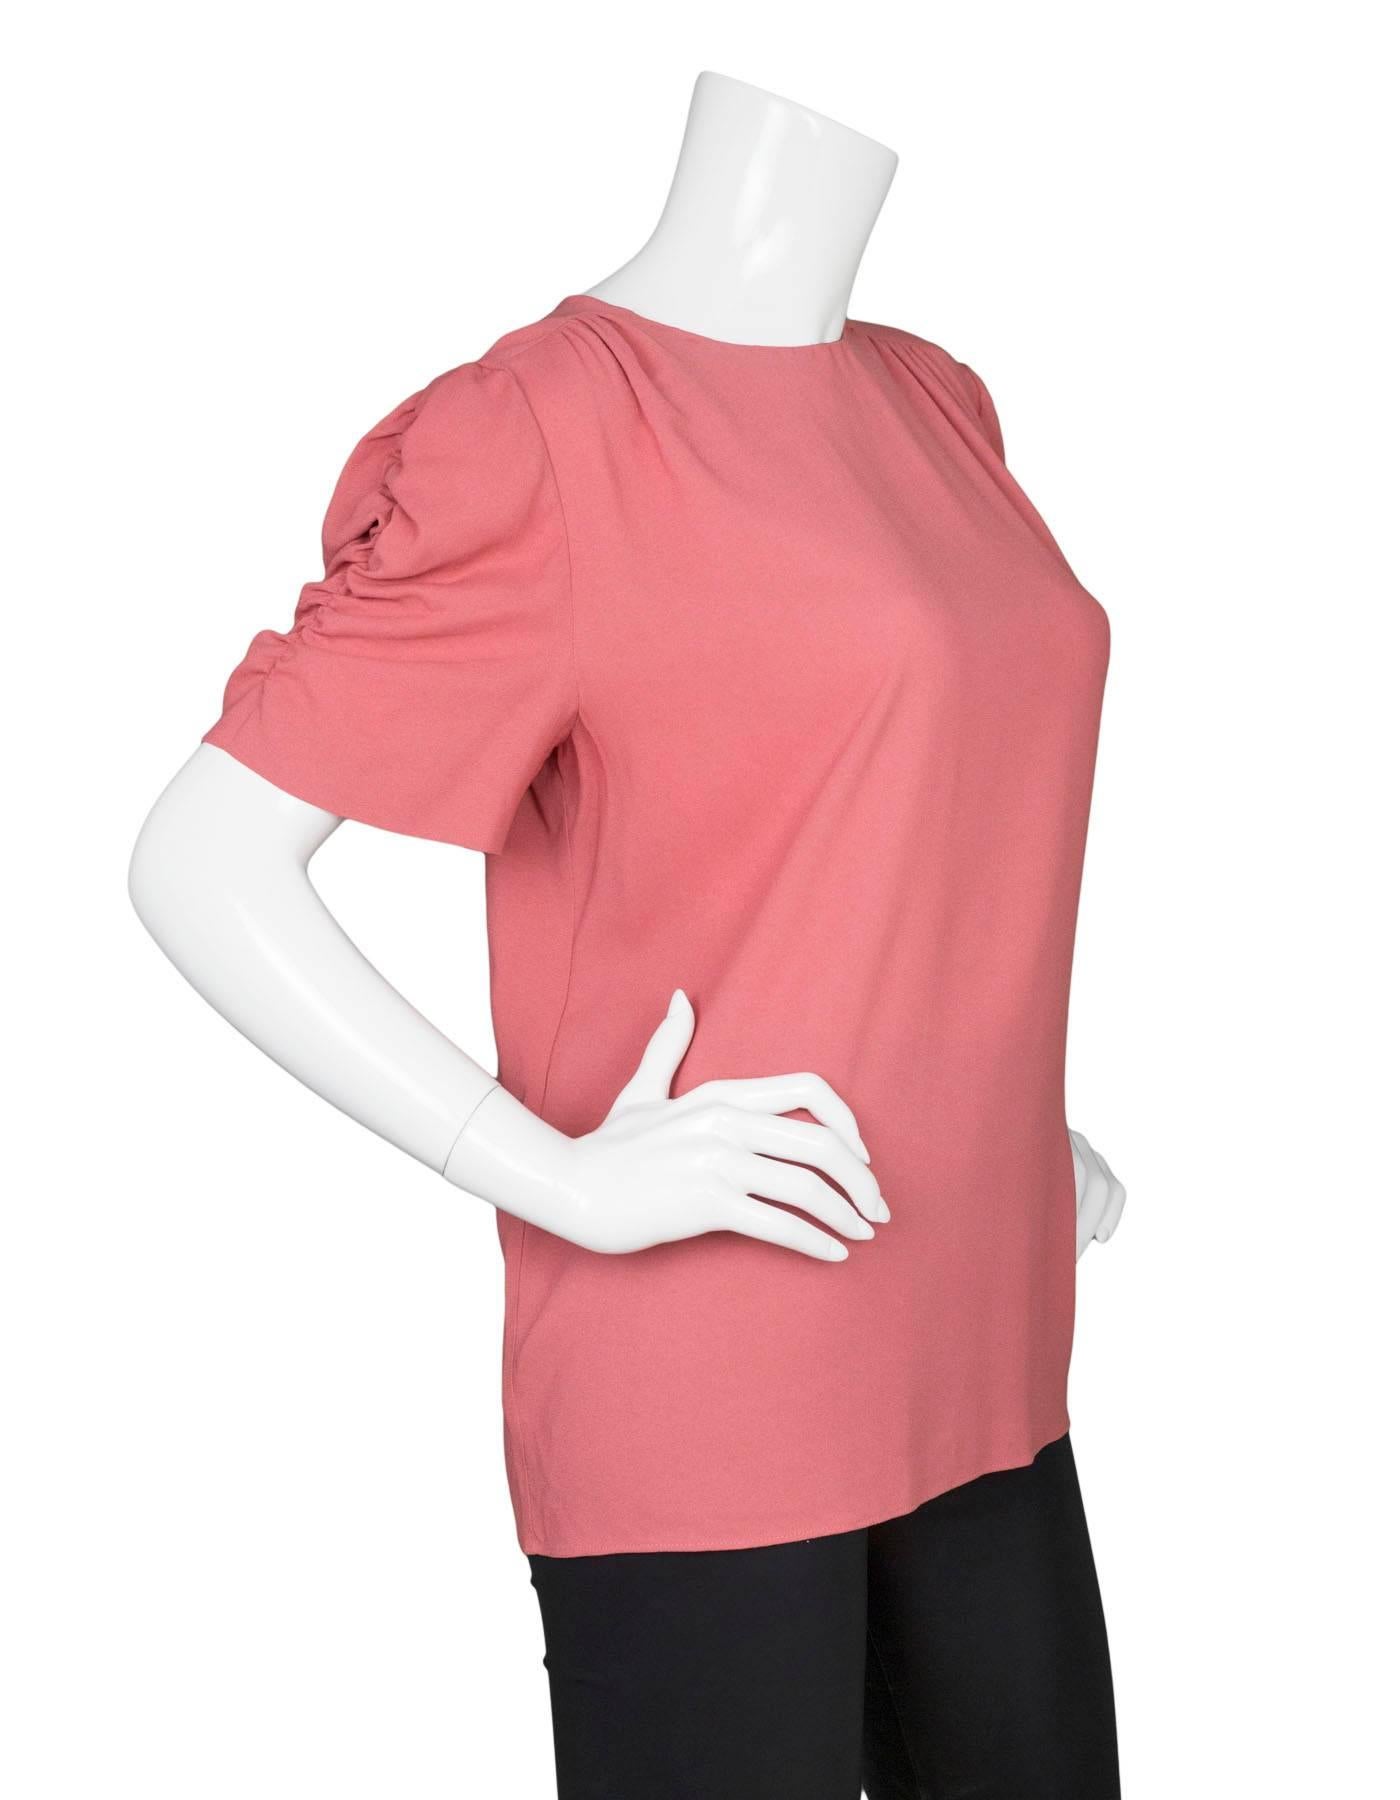 Miu Miu Rose Silk Short Sleeve Top 
Features ruched sleeves

Made In: Italy
Color: Pink rose
Composition: 98% viscose, 2% elastane
Lining: Pink rose, 100% polyester
Closure/Opening: Back button down
Exterior Pockets: None
Interior Pockets: